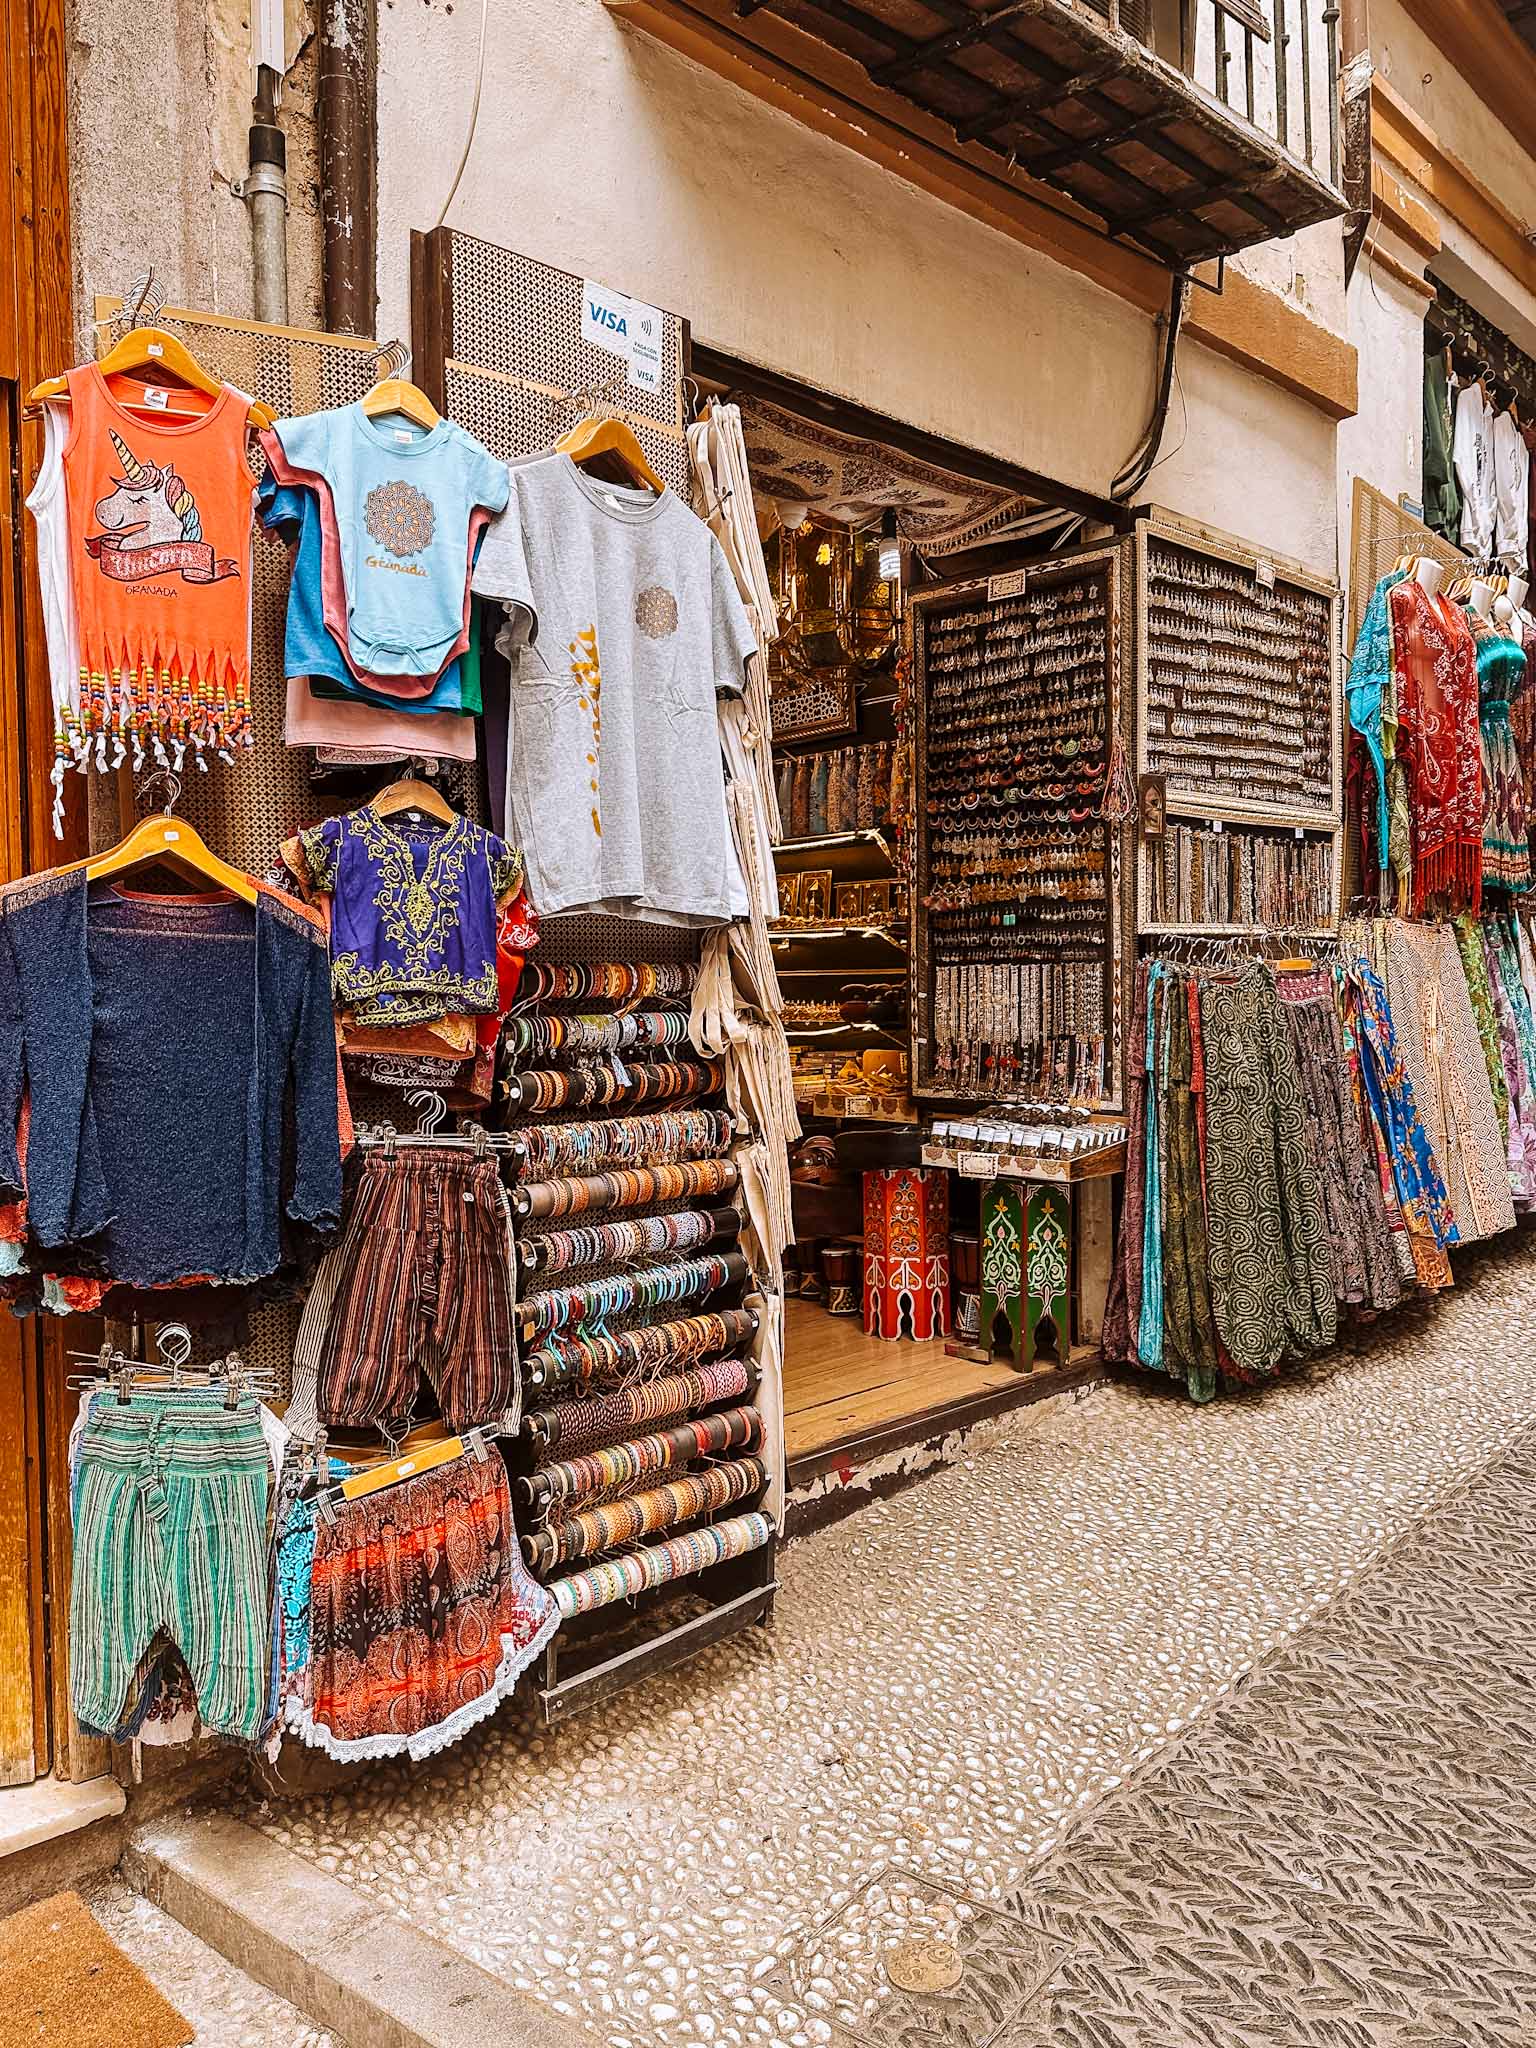 Top things to do in Granada, Spain - street markets and souvenir shopping